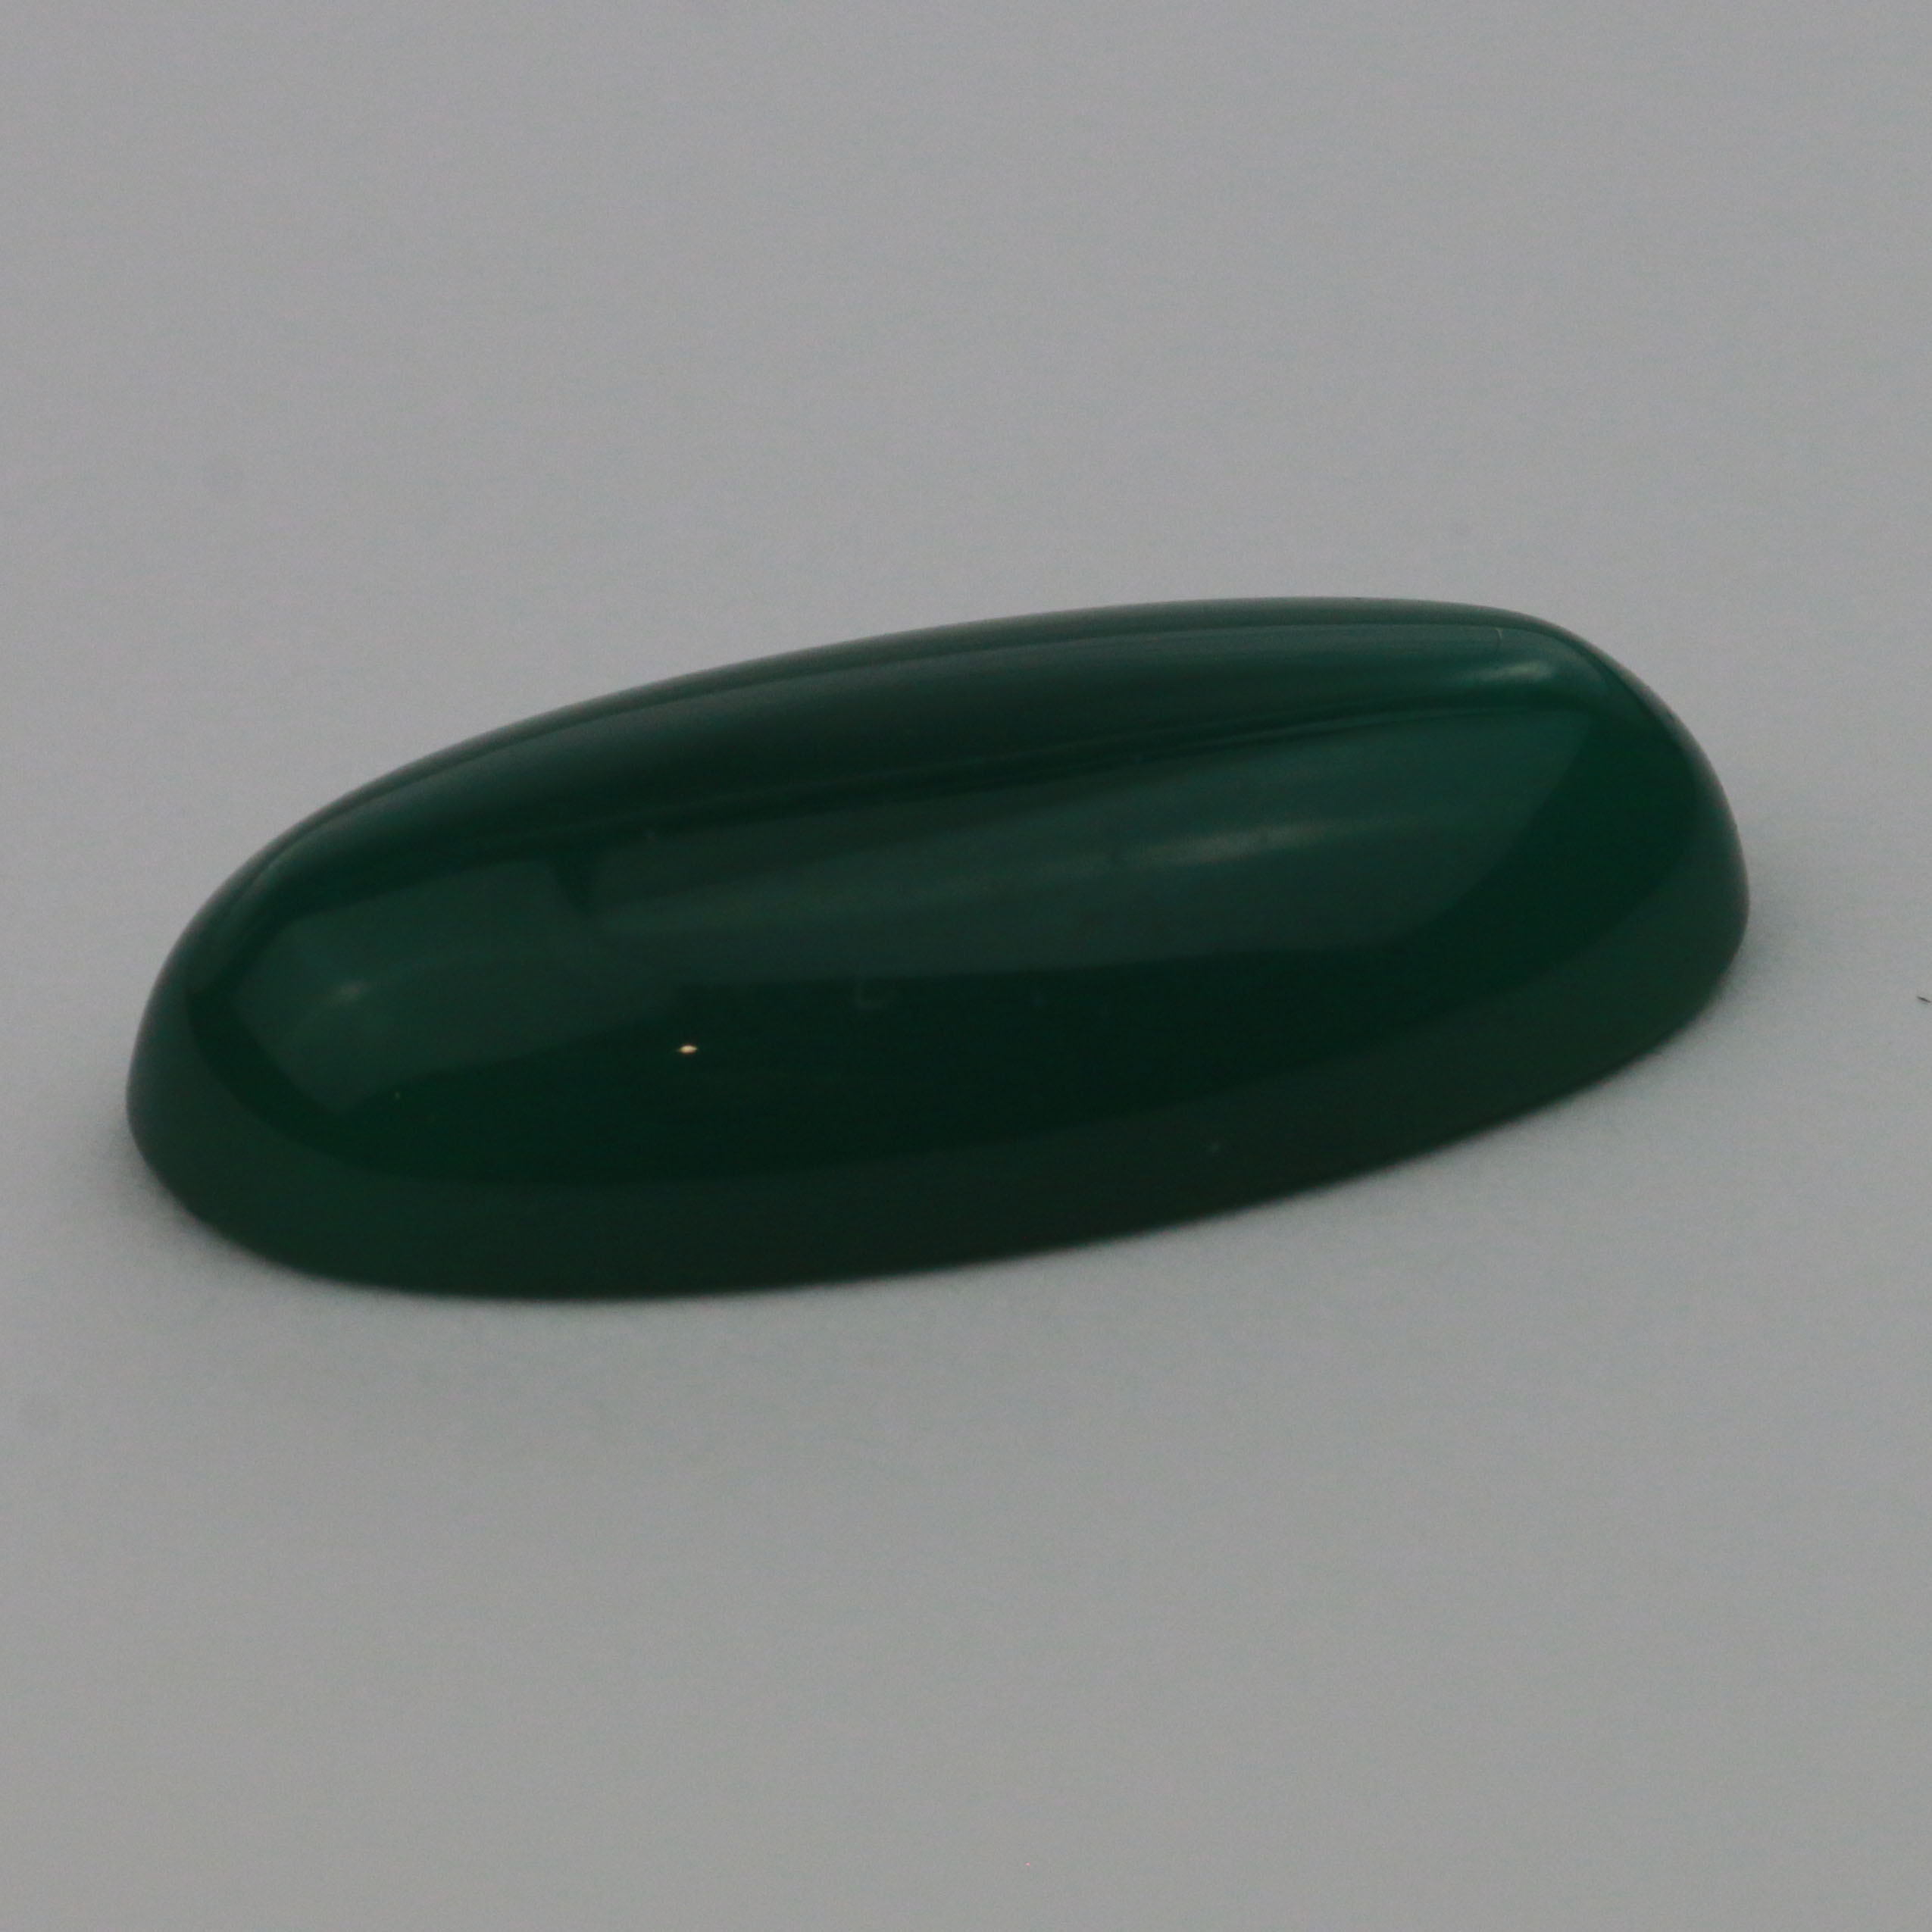 22X11 OVAL CABOCHON GREEN AGATE